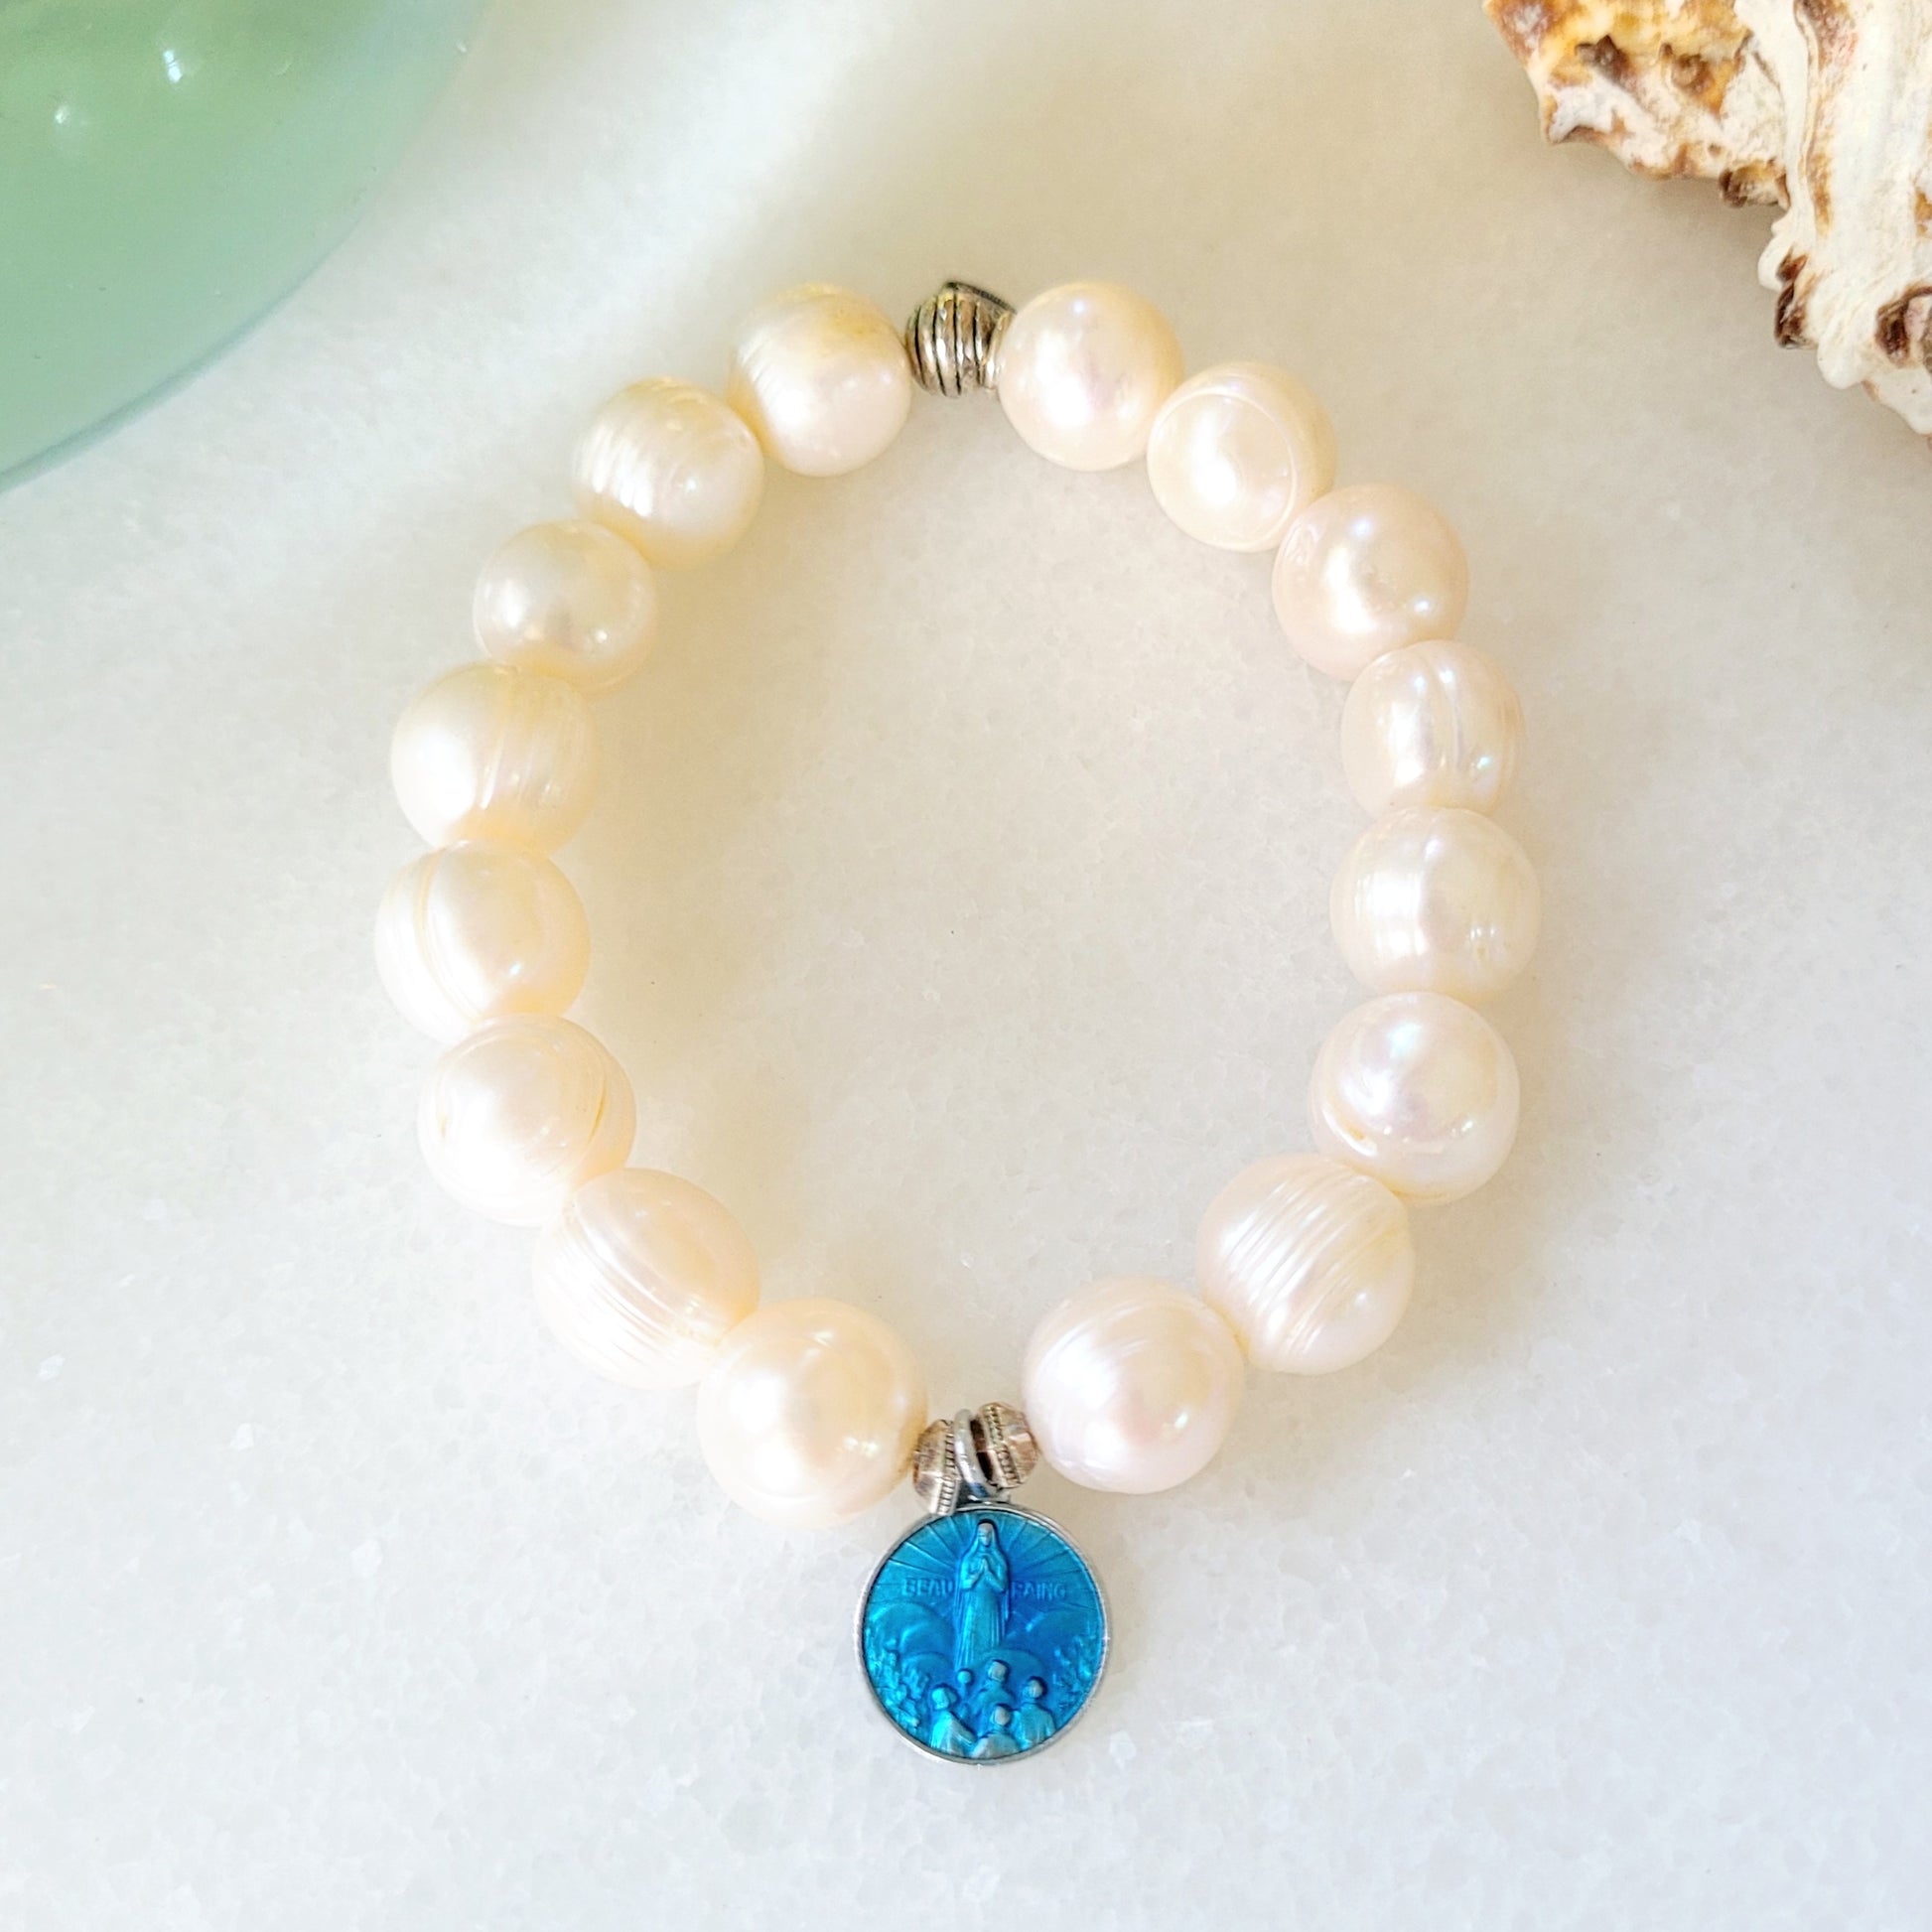 Freshwater Pearl 12mm Beaded Bracelet w/ Enameled Our Lady of Beauraing Medal - Afterlife Jewelry Designs